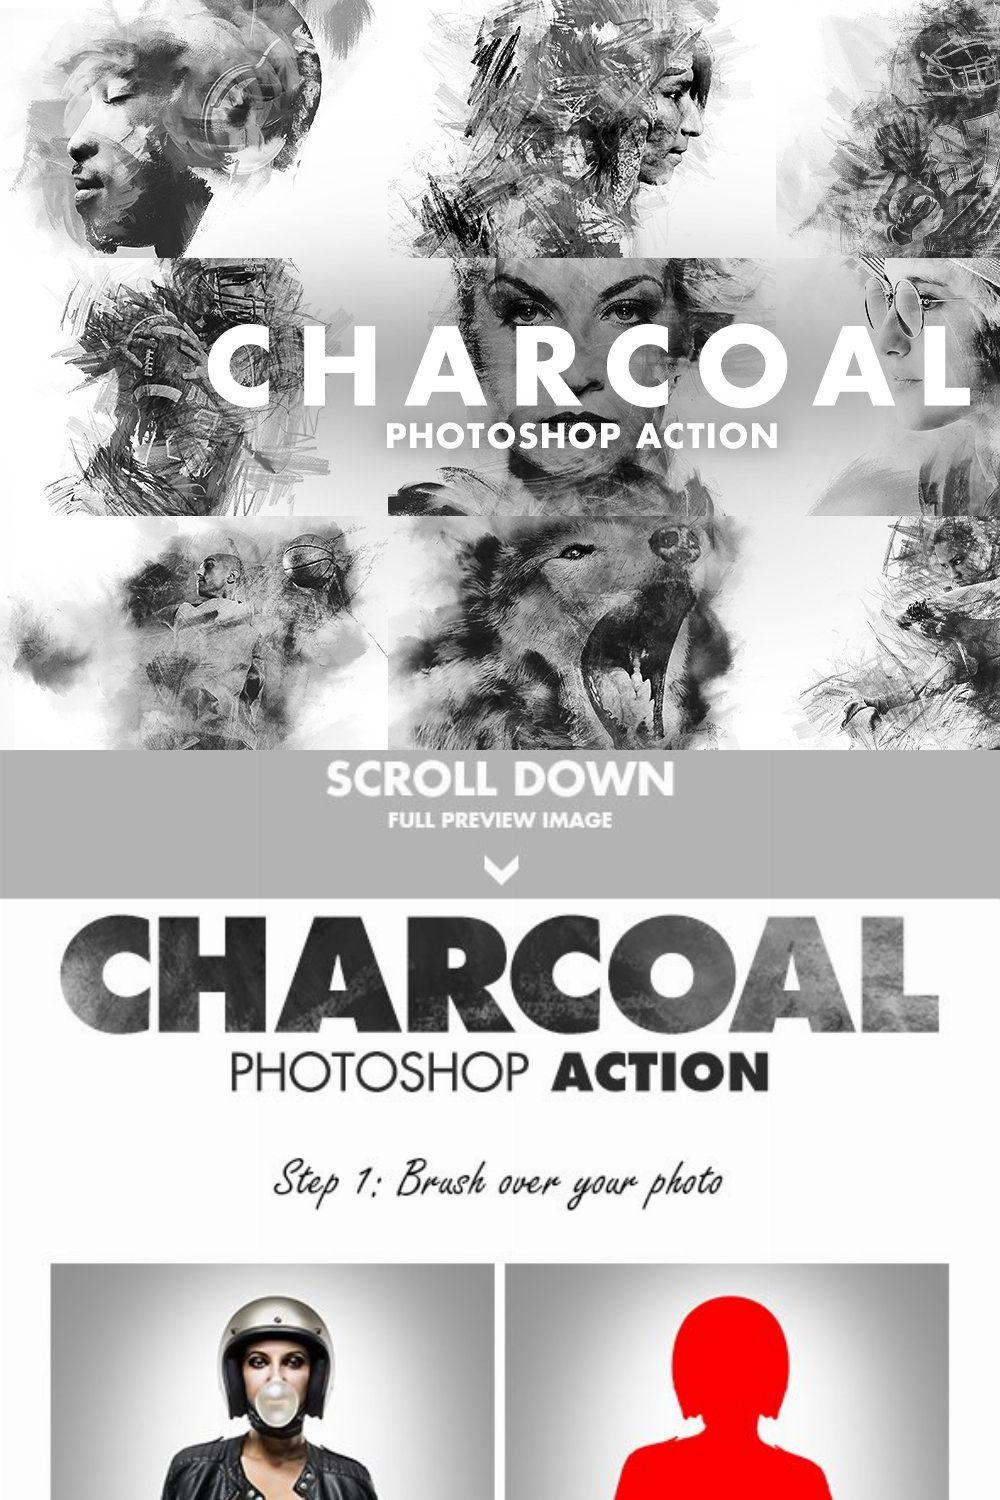 Charcoal Photoshop Action pinterest preview image.